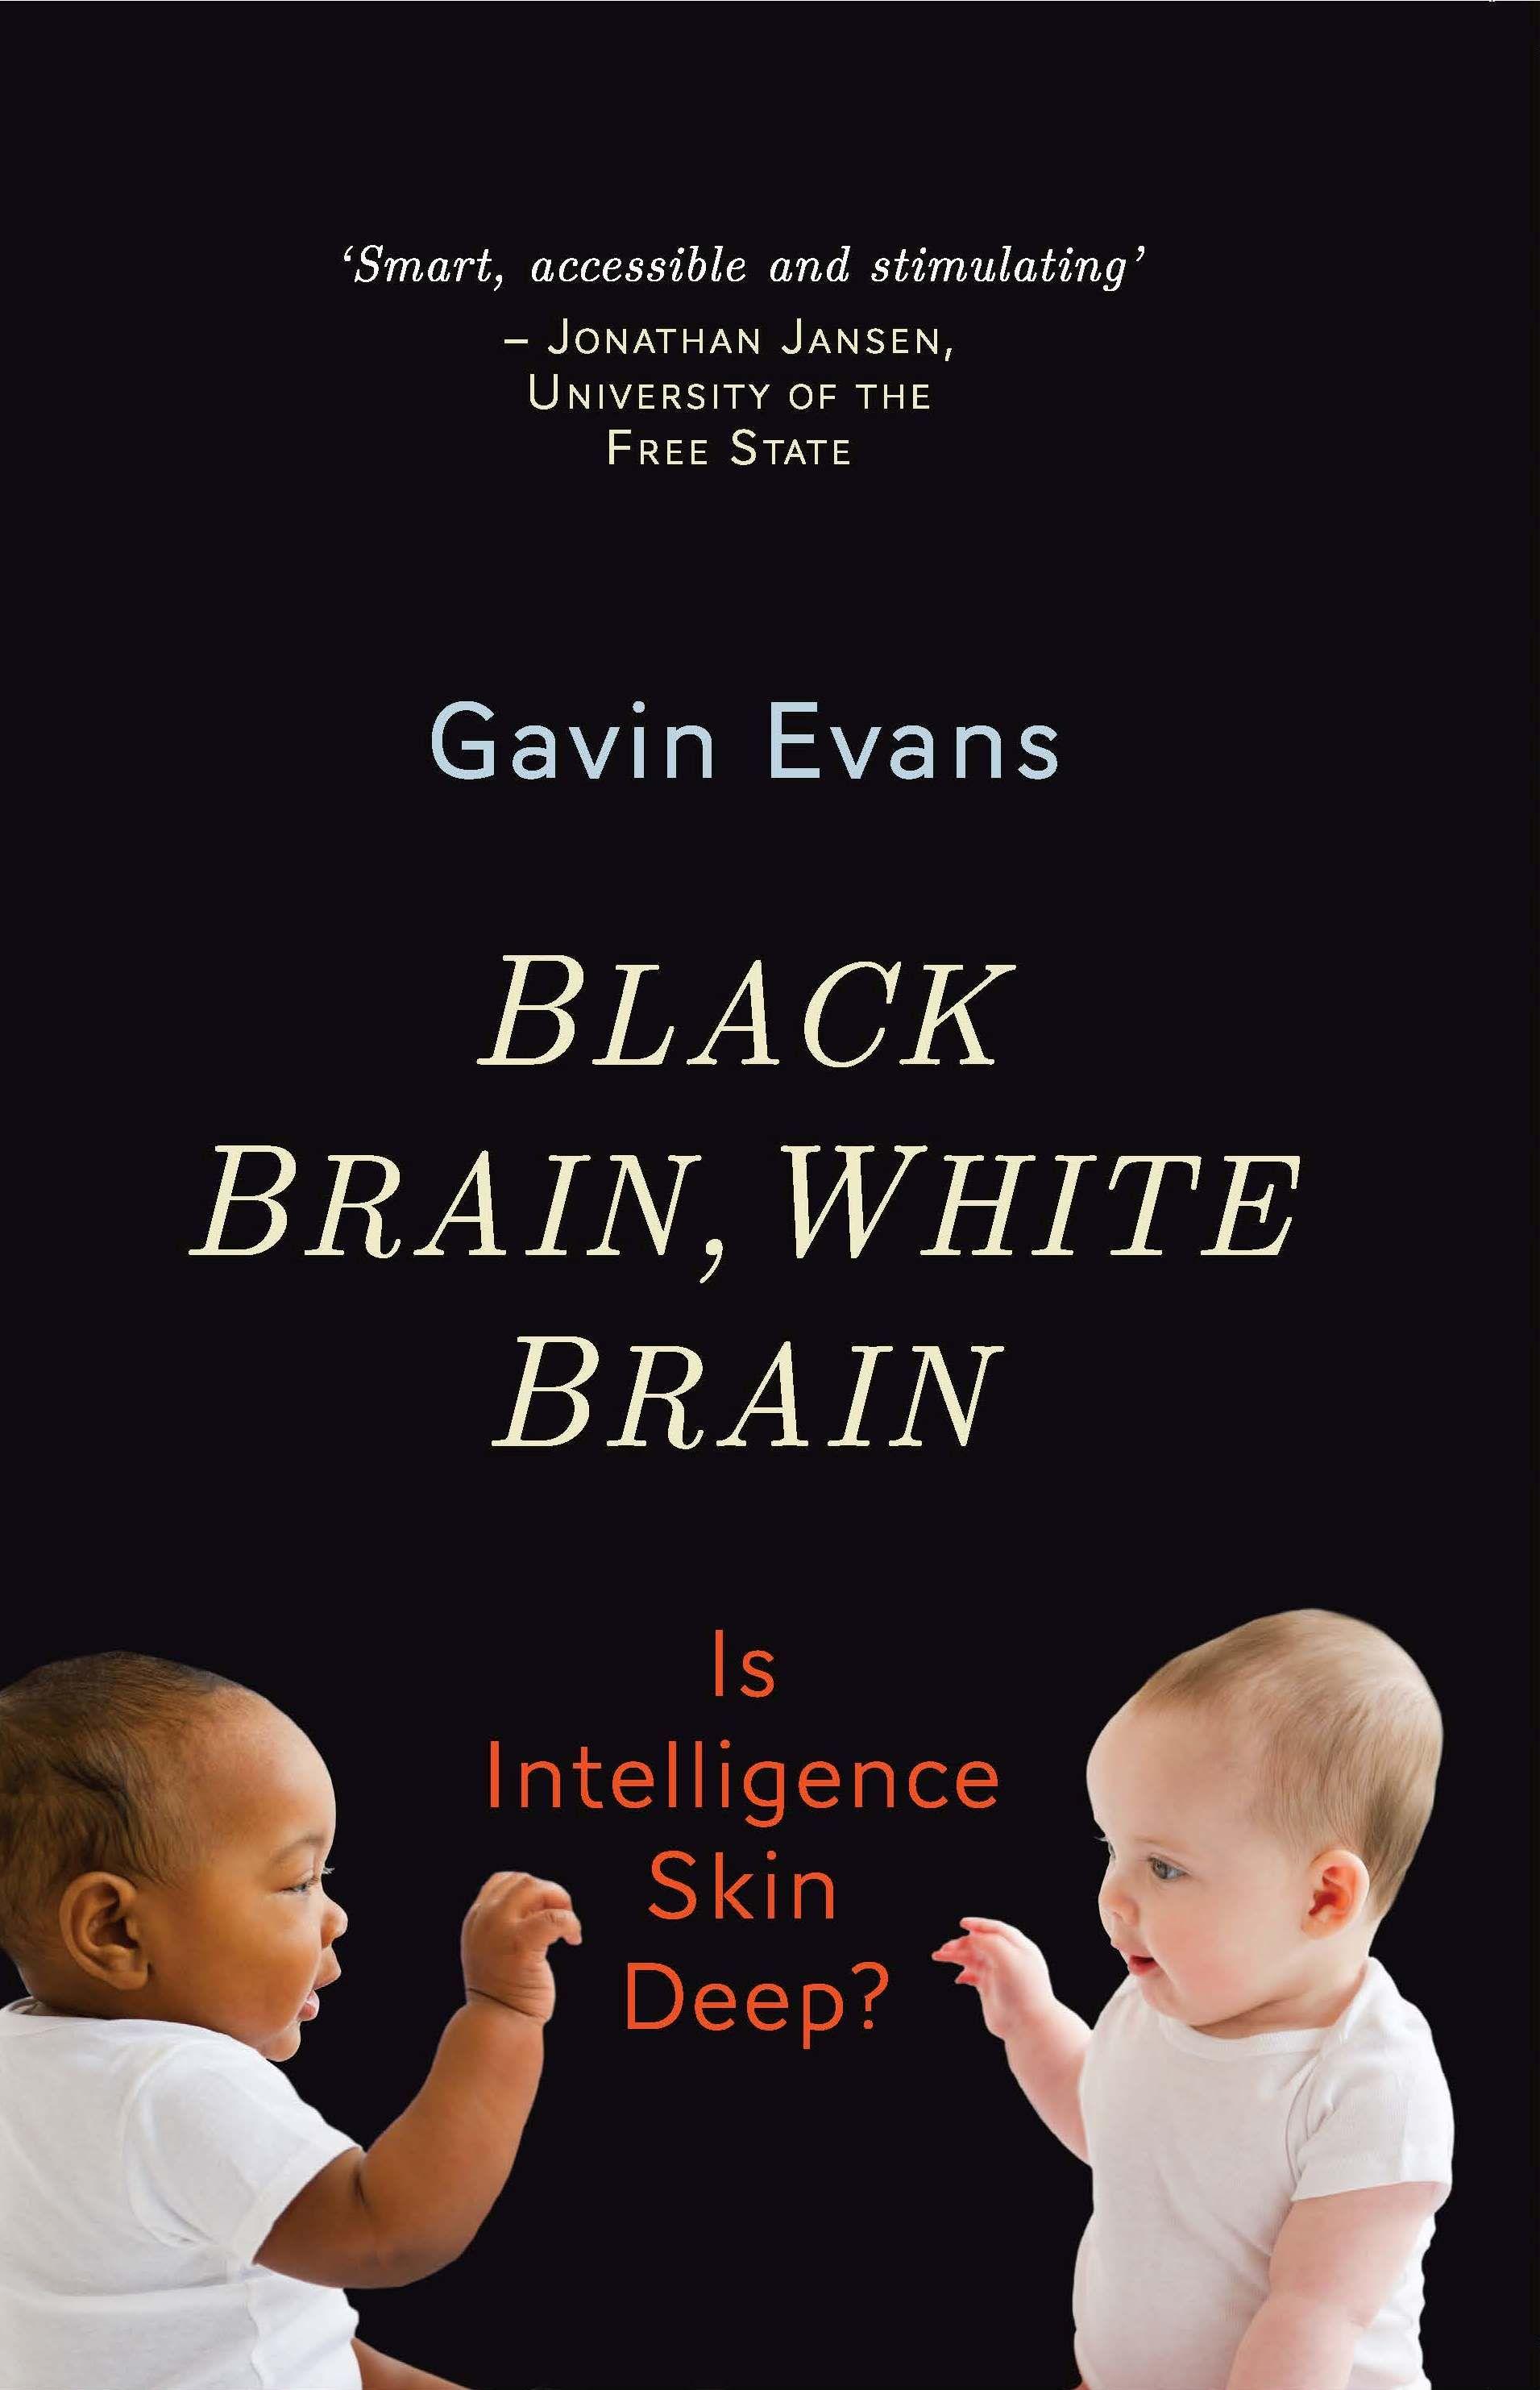 Intelligent Black and White Logo - Black Brain, White Brain - The new wave of racist science | Africa Check